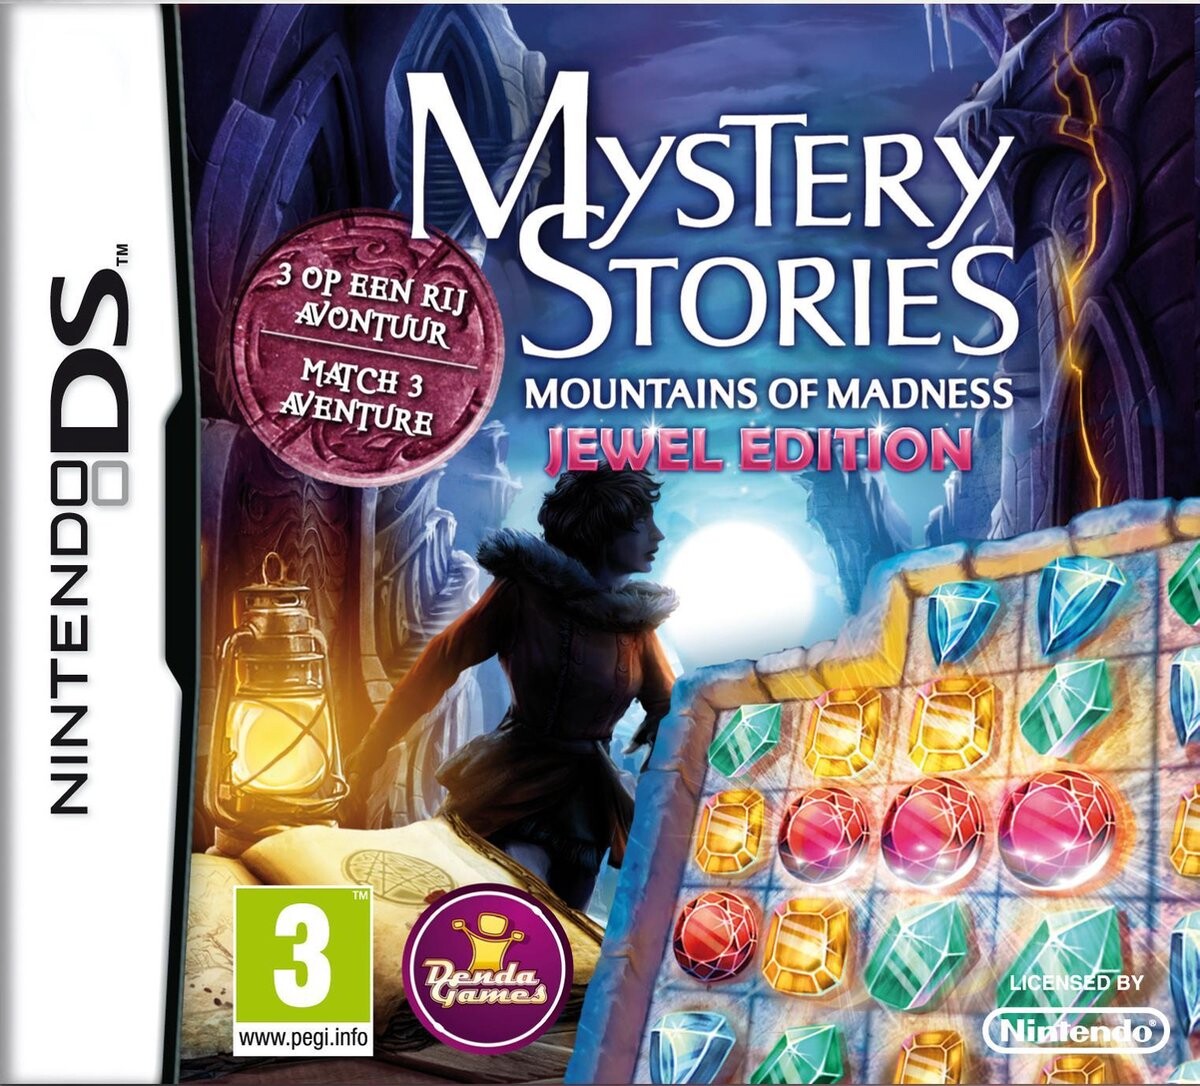 Mystery Stories Mountains of Madness (Jewel Edition) Kopen | Nintendo DS Games